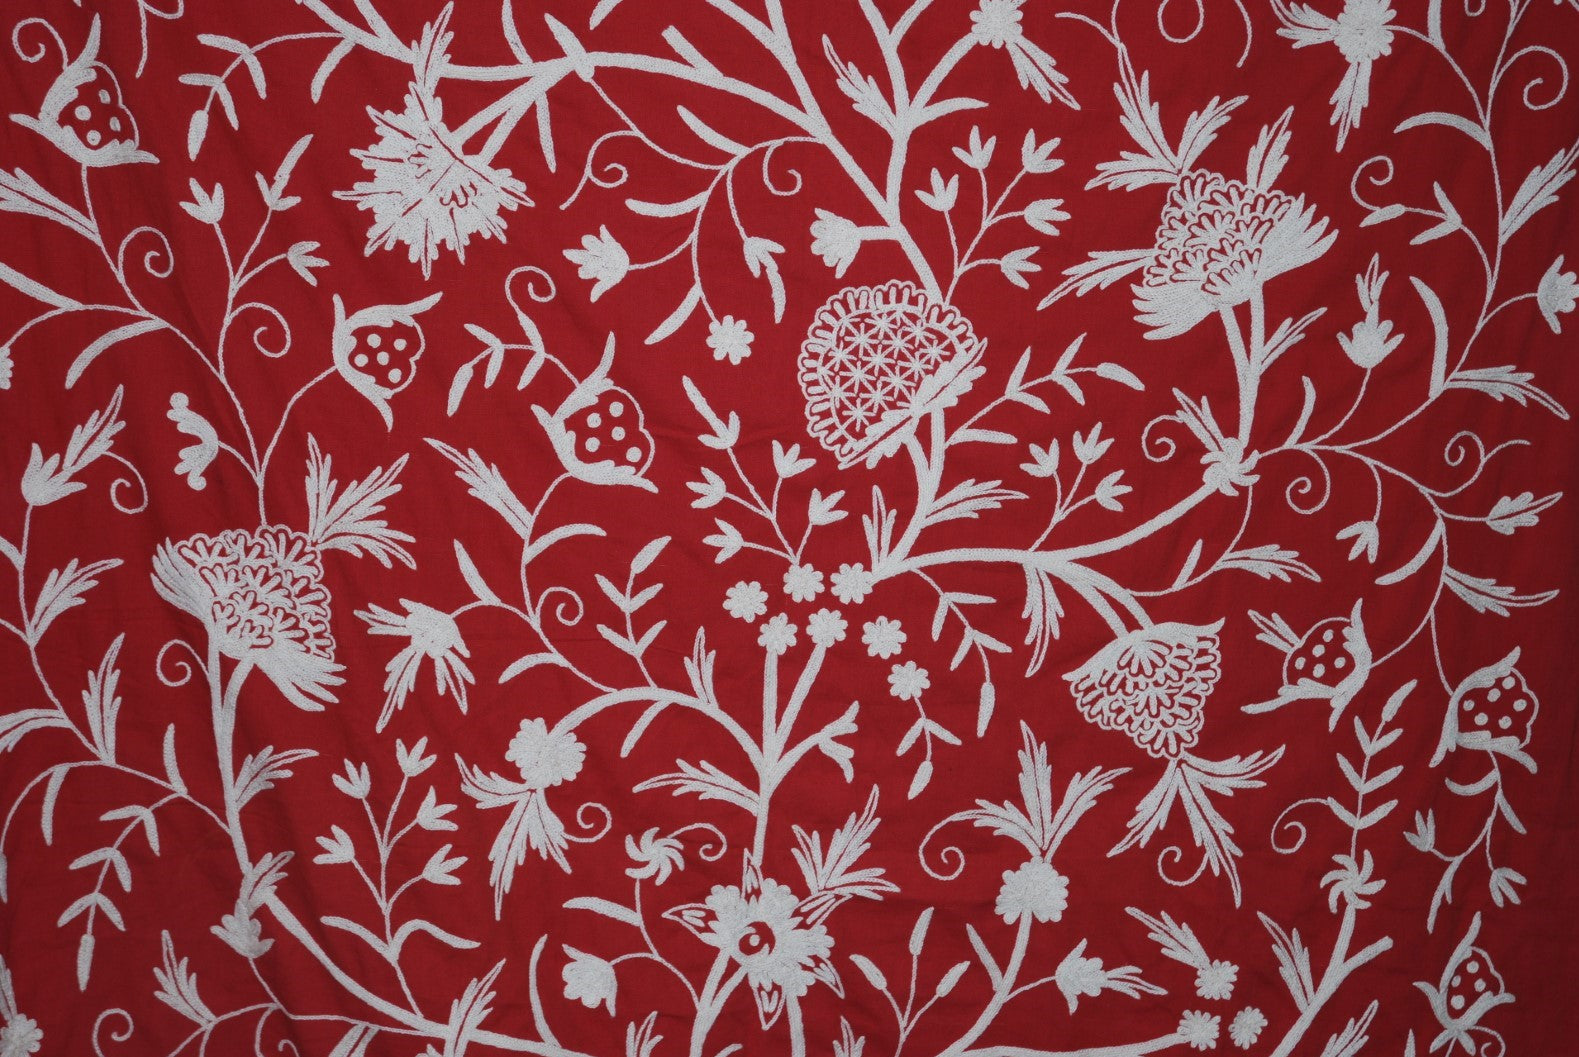 Cotton Crewel Embroidered Fabric Tree of Life, White on Red #DDR032